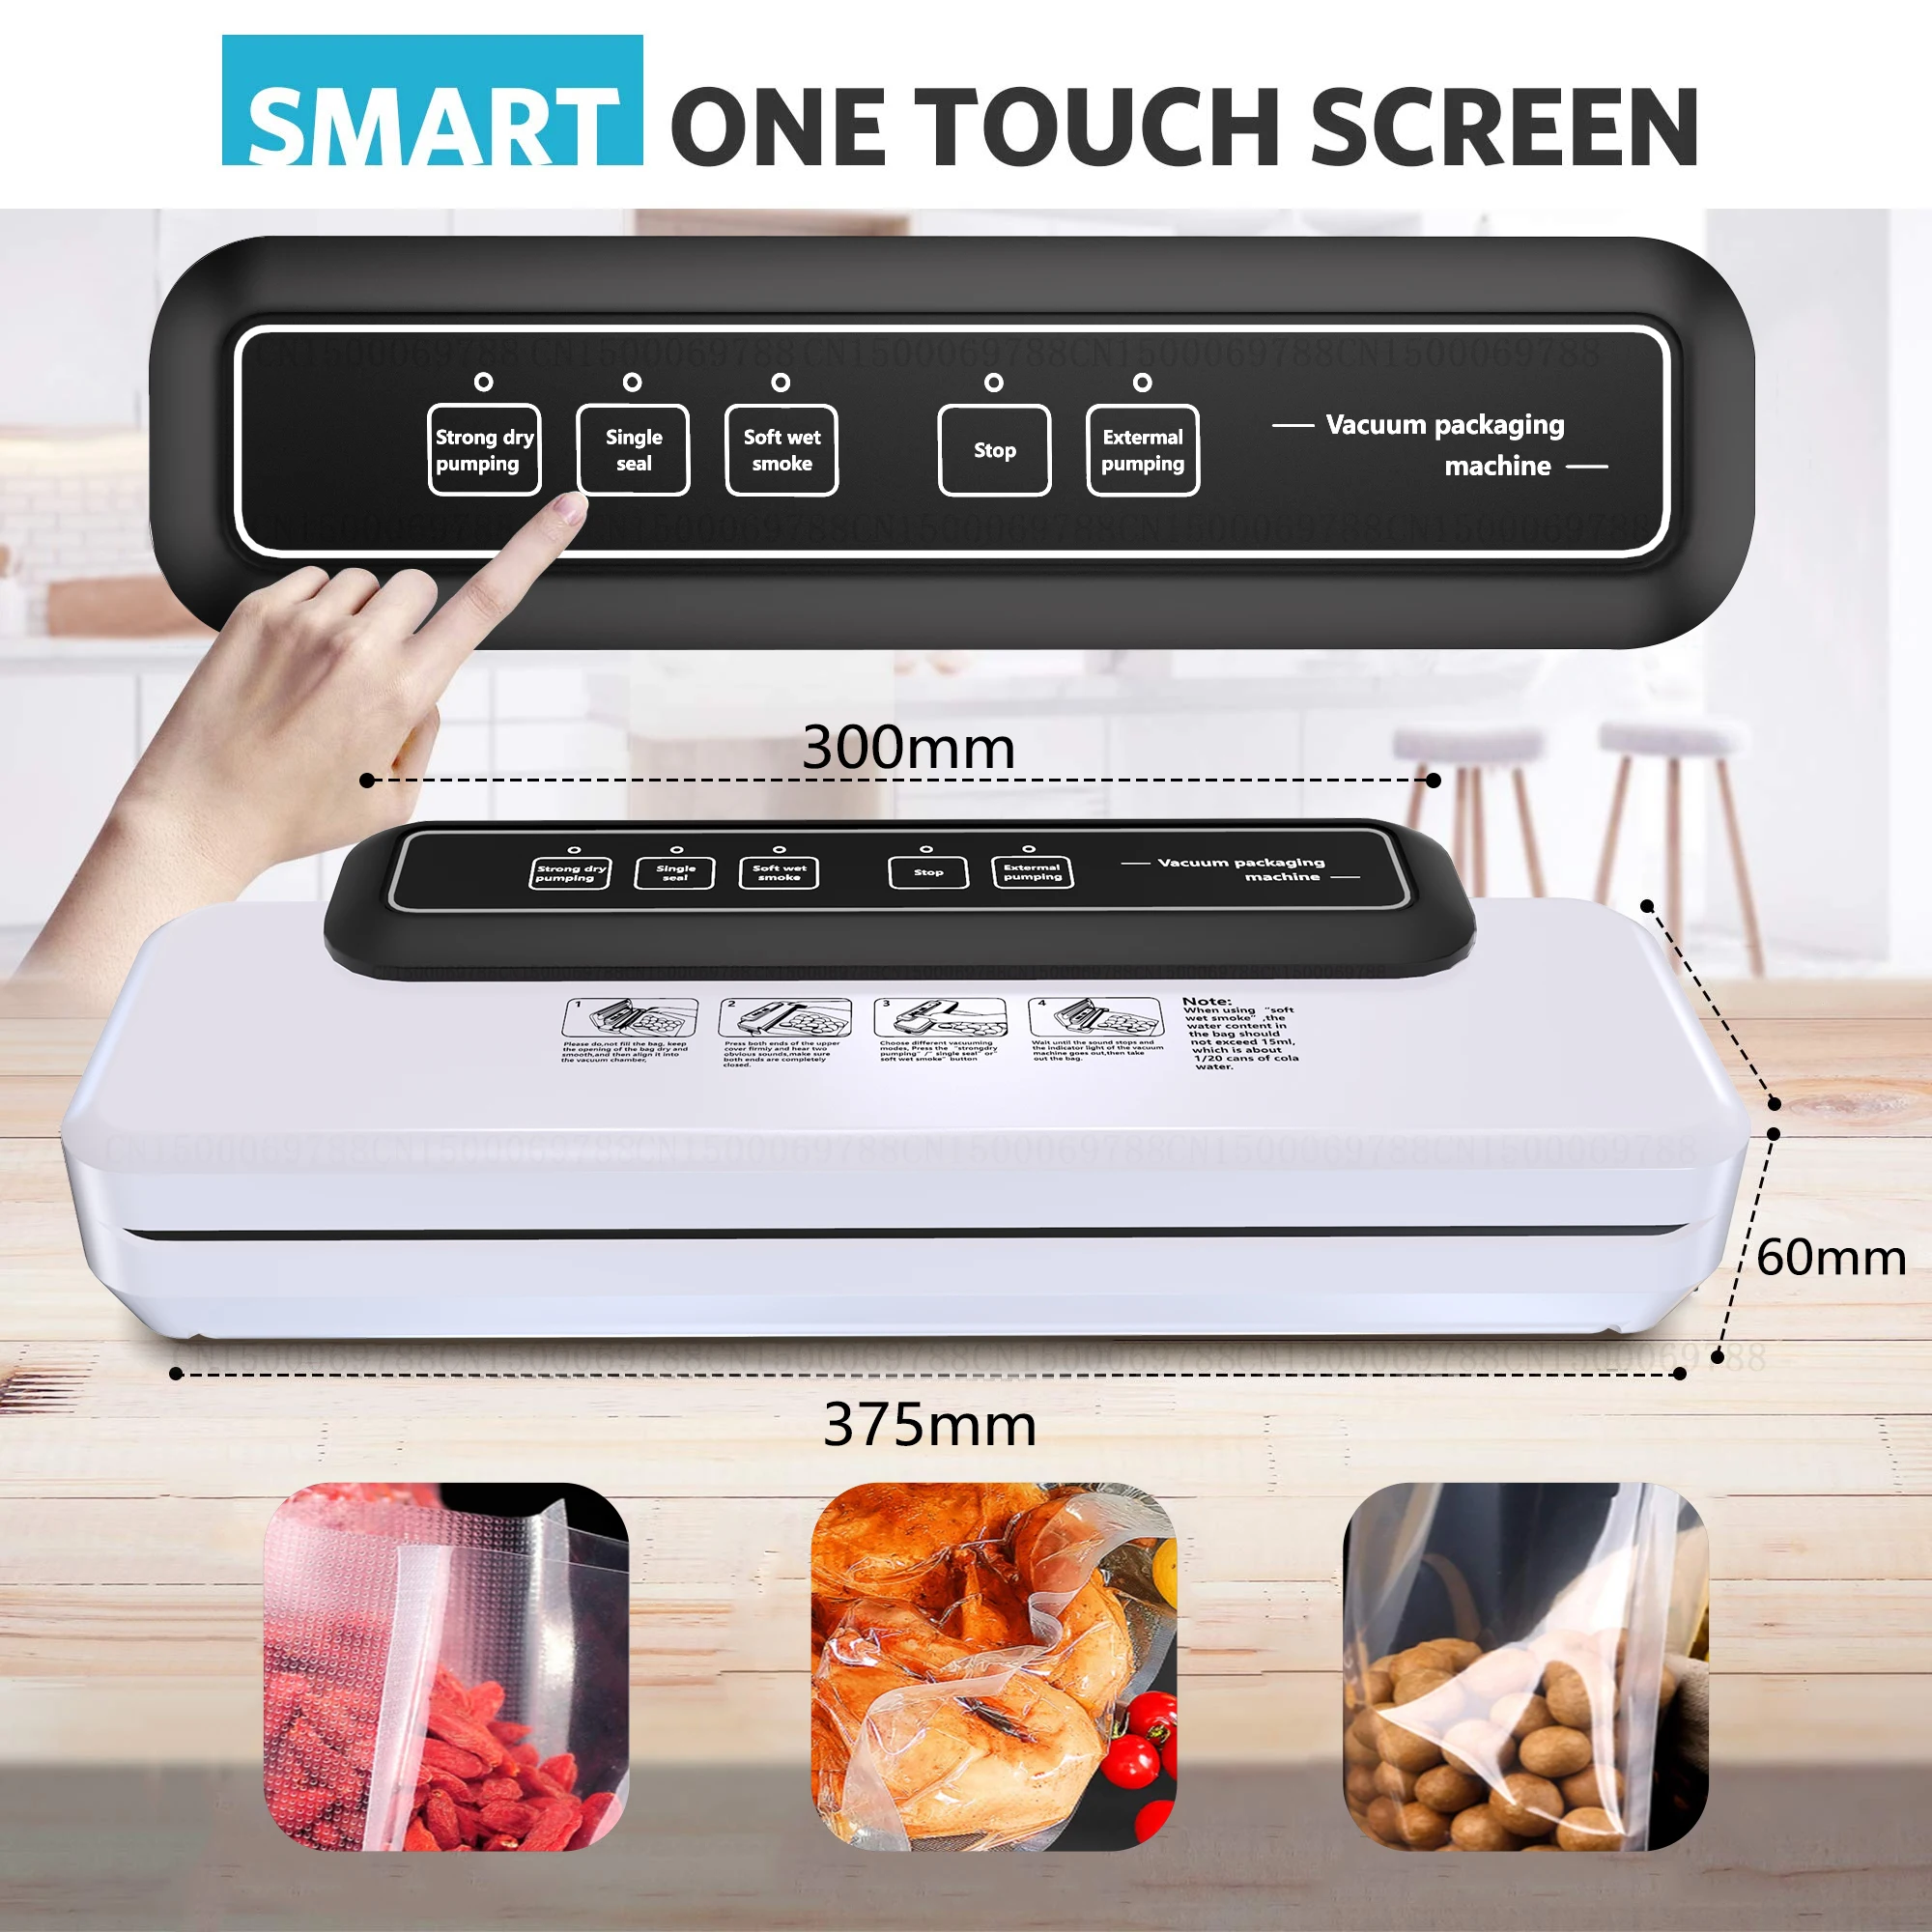 https://ae01.alicdn.com/kf/H4910026056a1412bb23bf0995ec1a944L/Kitchen-Vacuum-Sealer-Strong-Sous-Pumping-Degasser-Sealing-Machine-Cans-Vacuum-Packer-For-Food-Storage-Dry.jpg